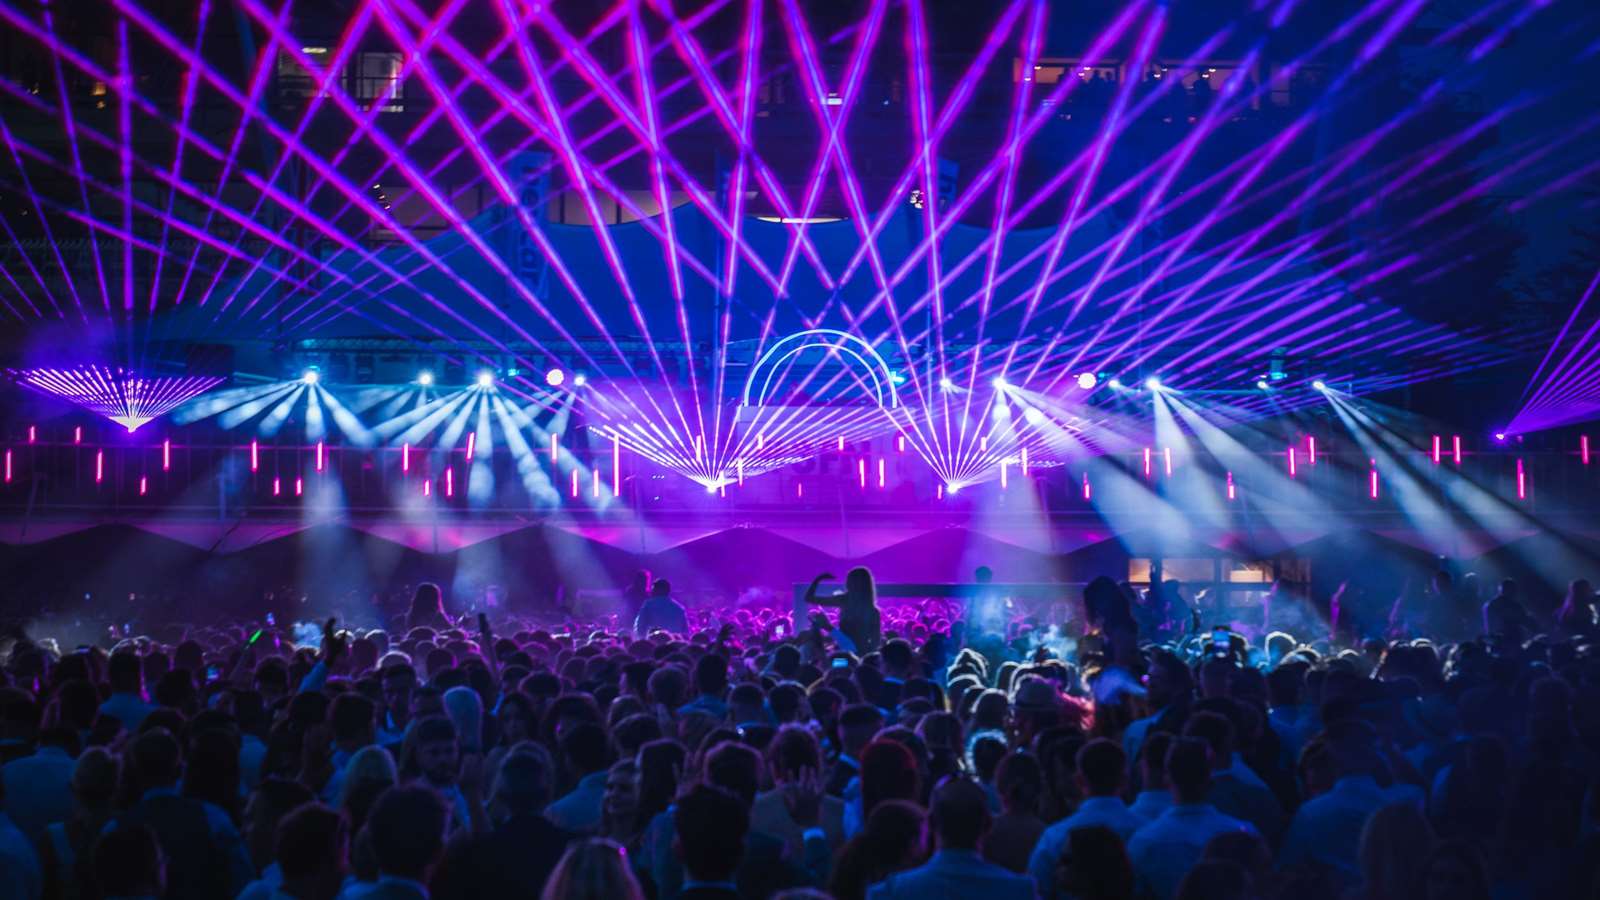 Pink and purple lasers illuminate the stage at Goodwood's Three Friday Nights events.